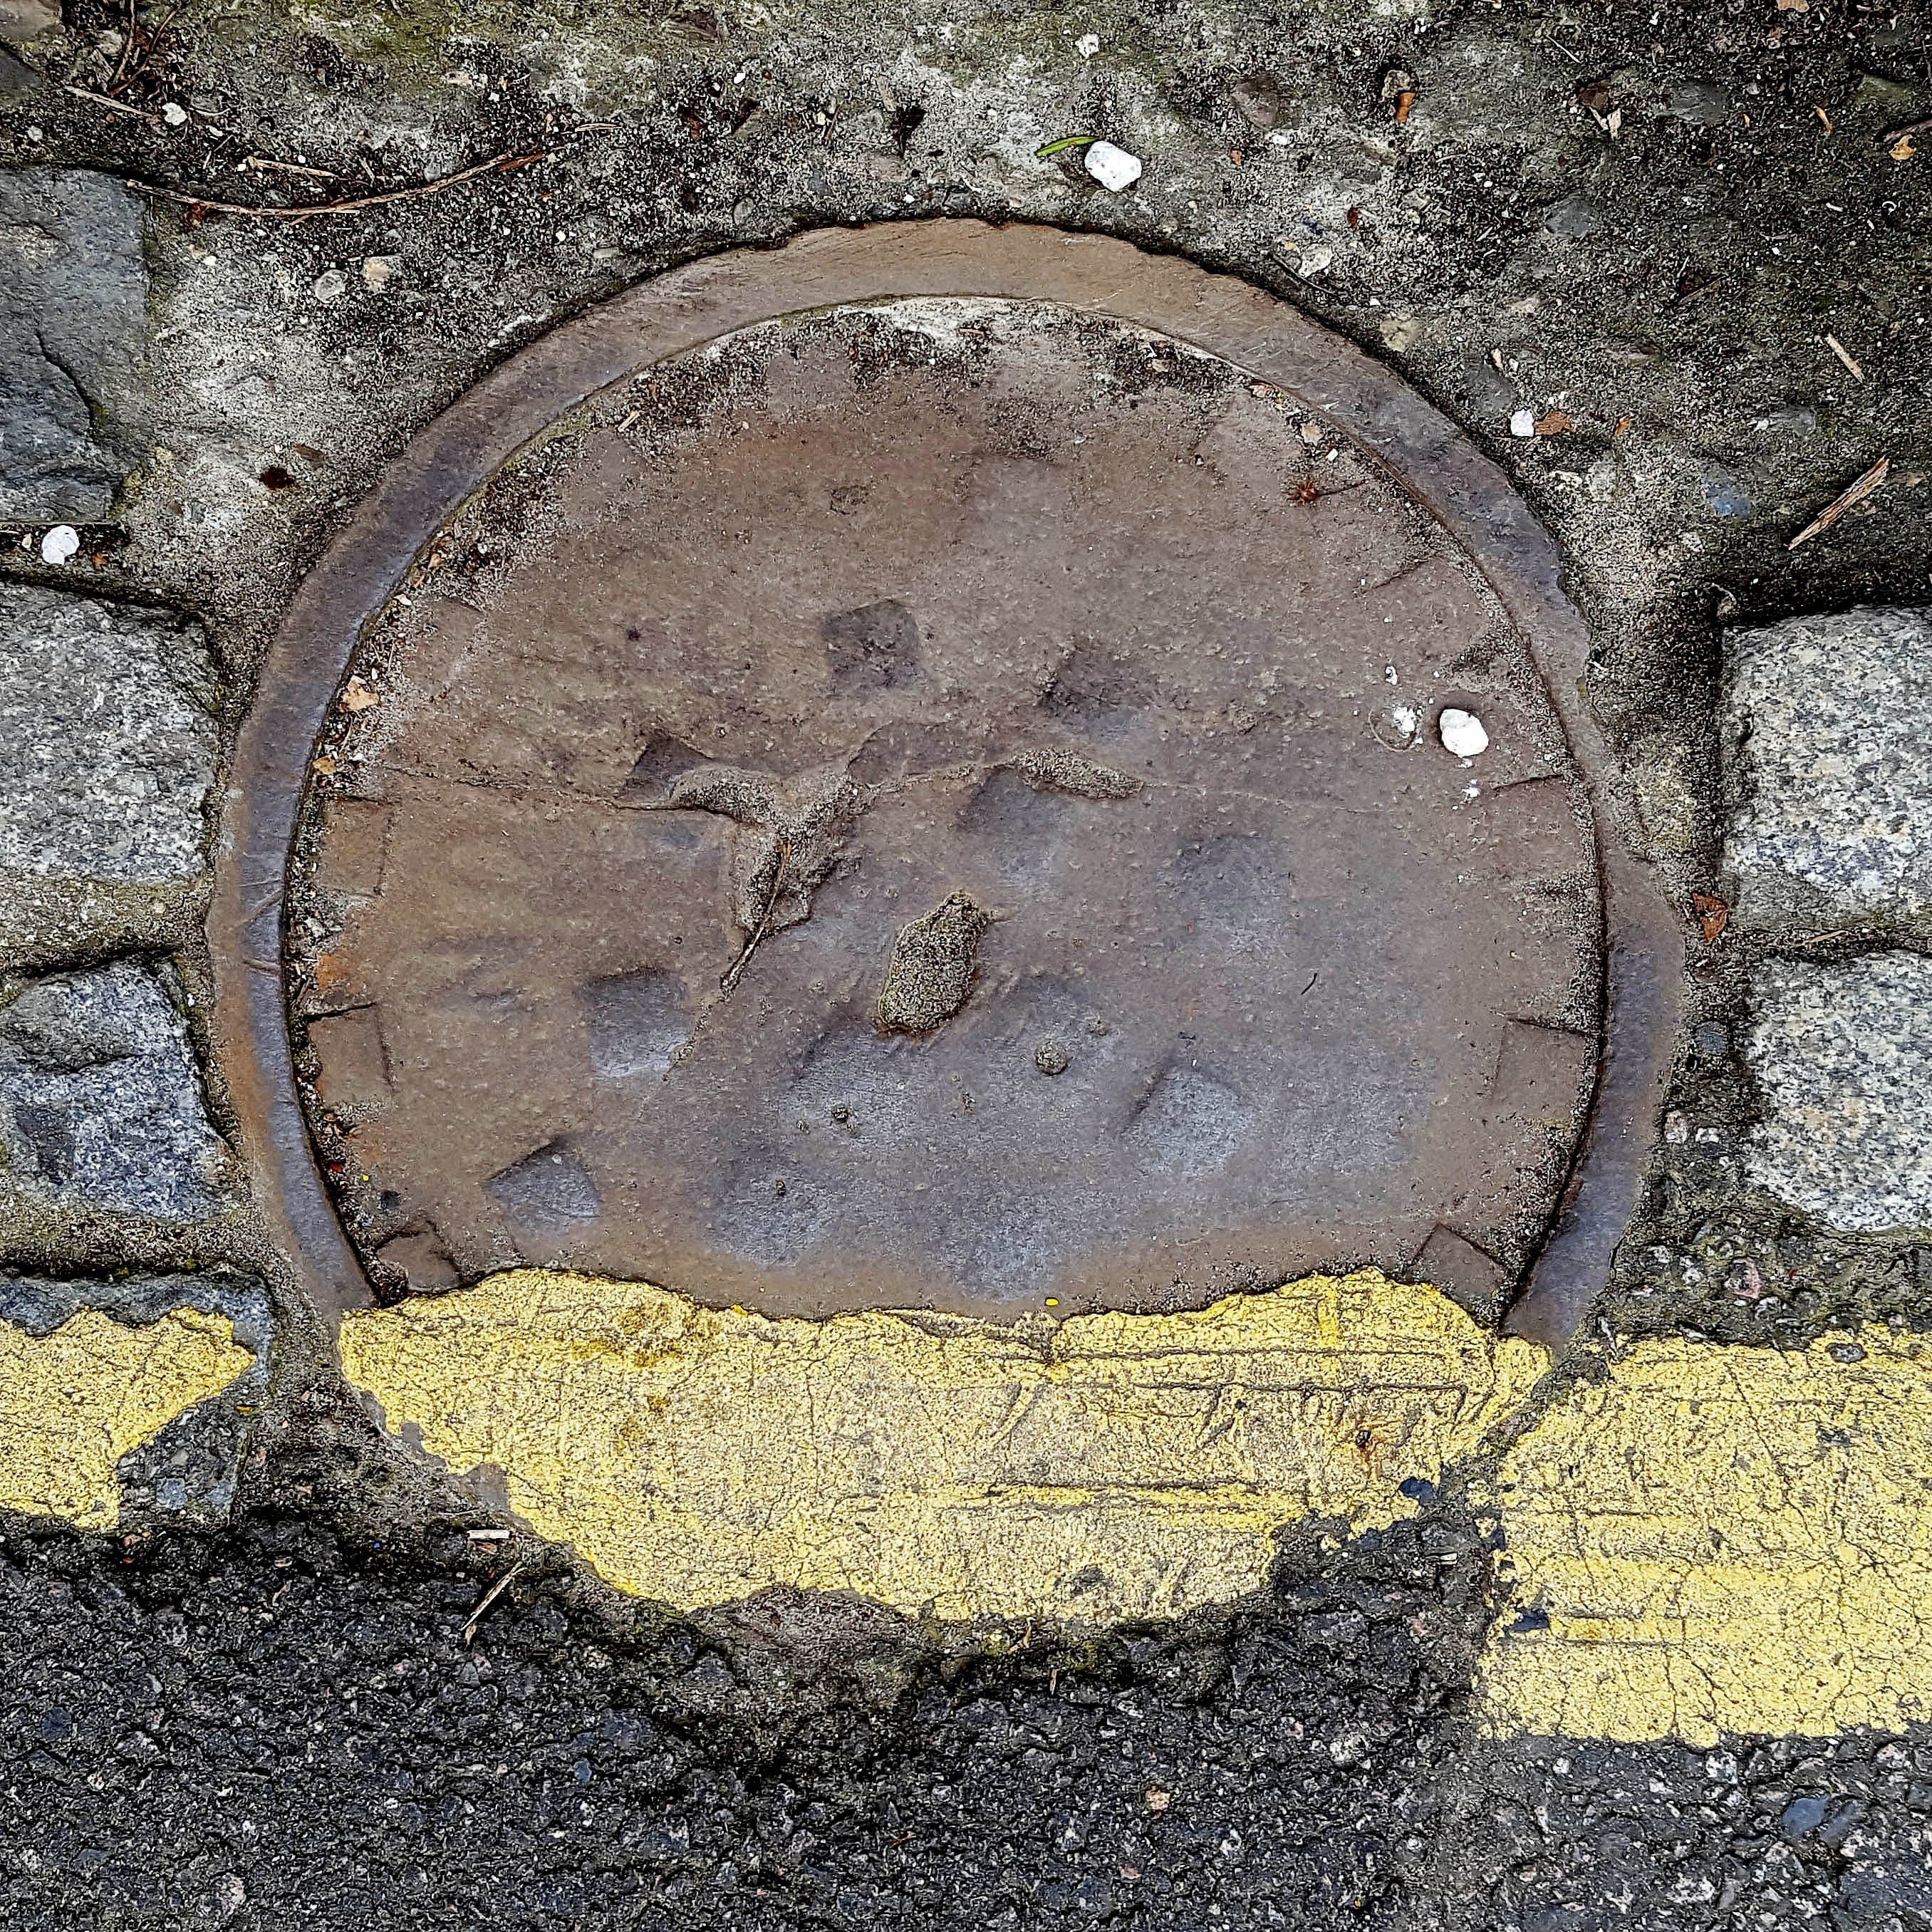 Manhole Cover, London - Cast iron with pattern of raised squares